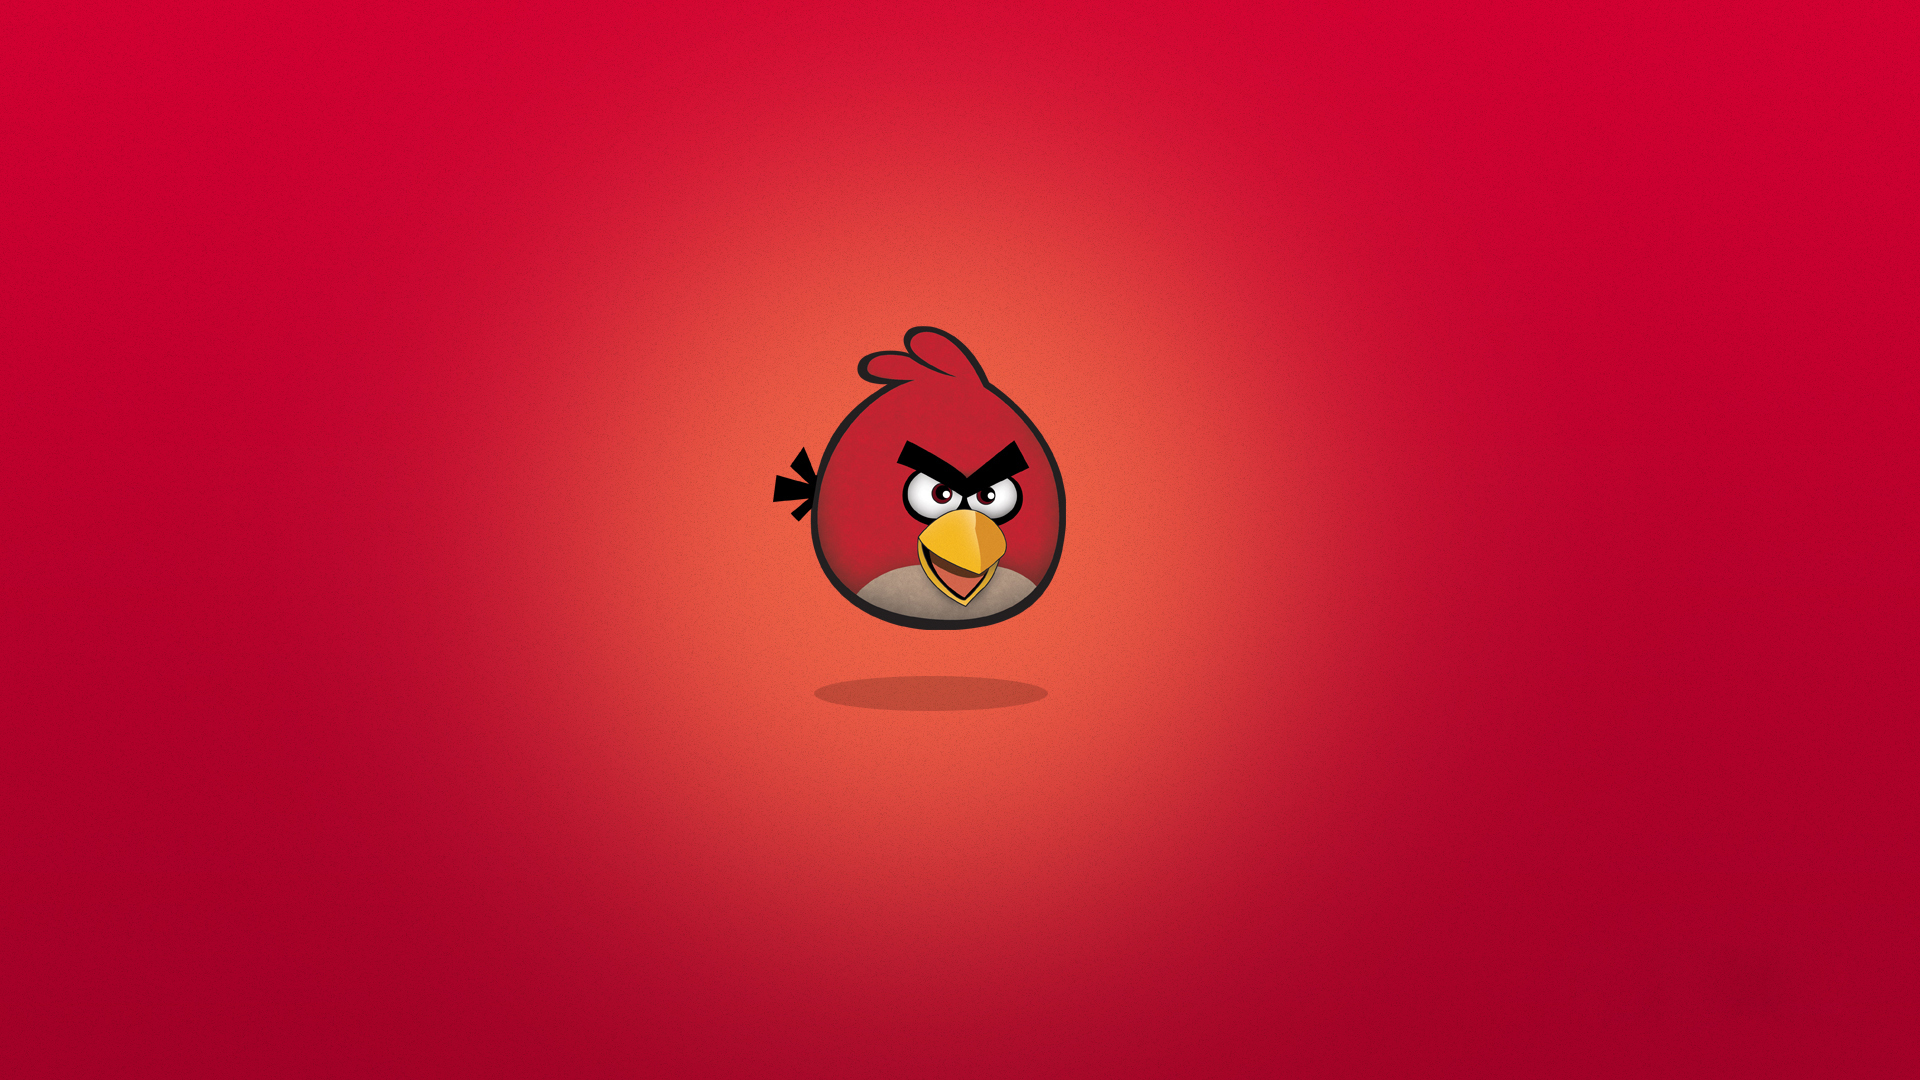 Angry Birds Wallpapers Desktop Wallpapers Angry Birds Wallpaper